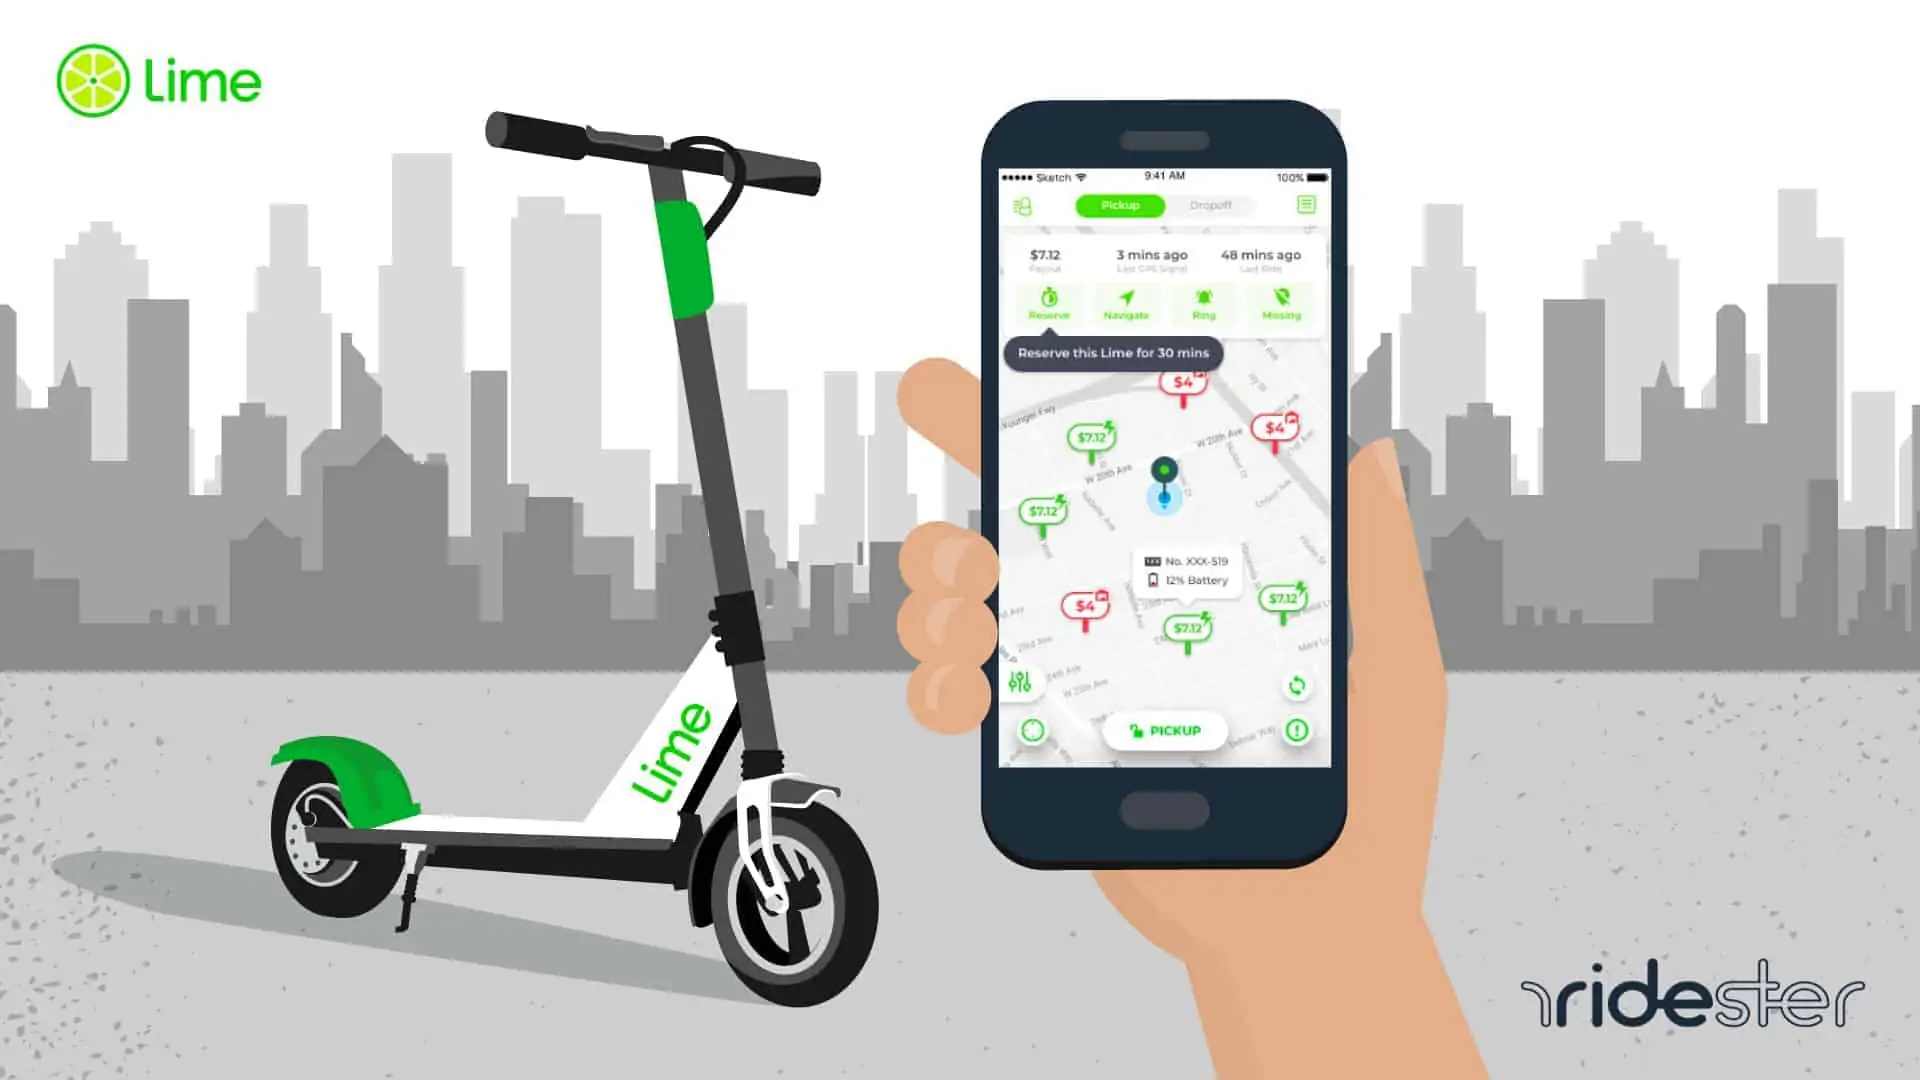 Scooter Price: How Scooters Cost? | Ridester.com